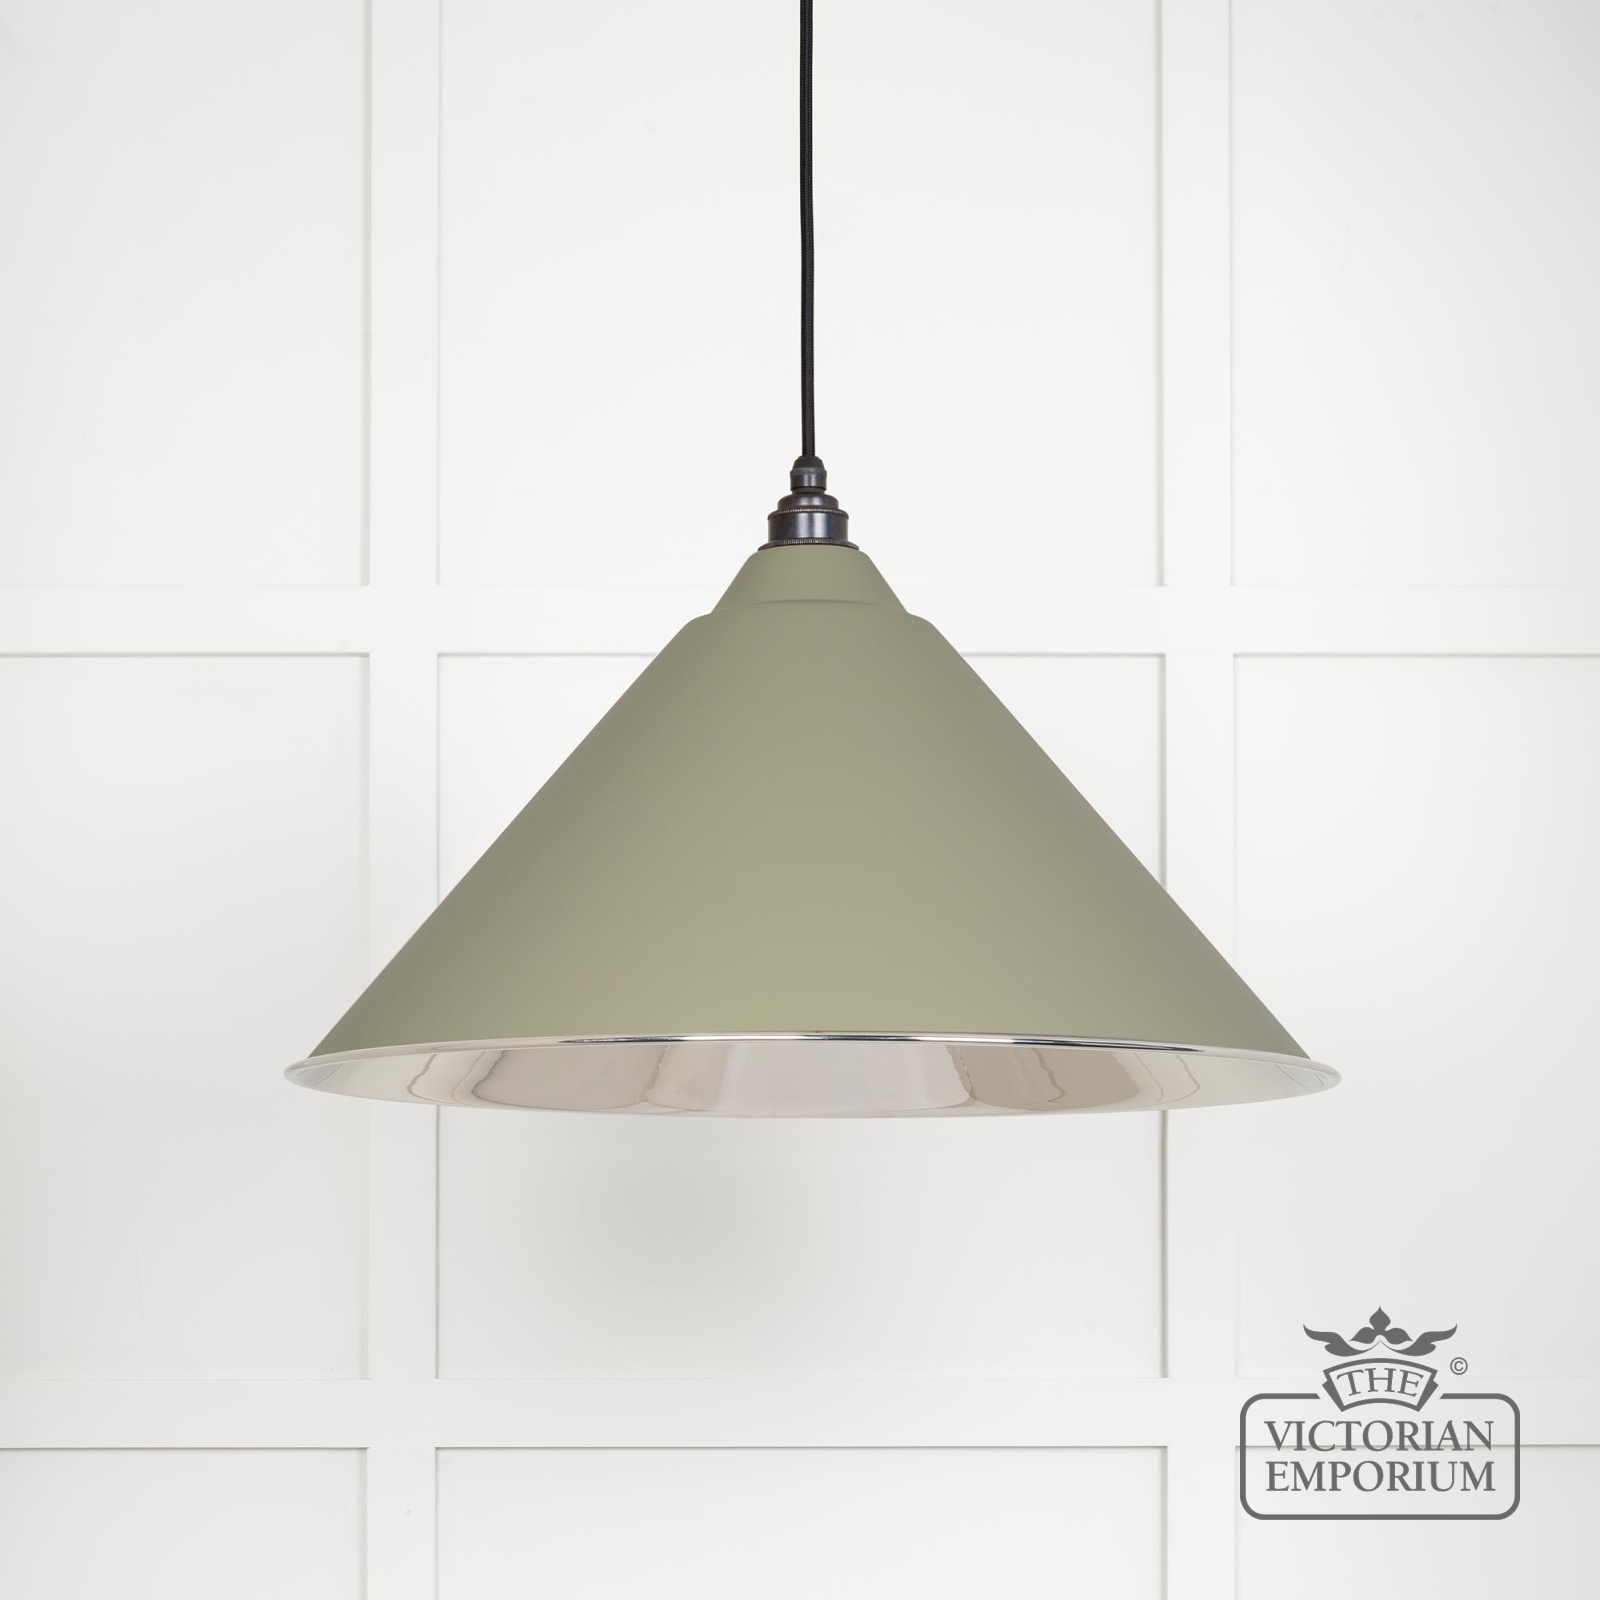 Hockliffe pendant light in smooth nickel and Tump exterior